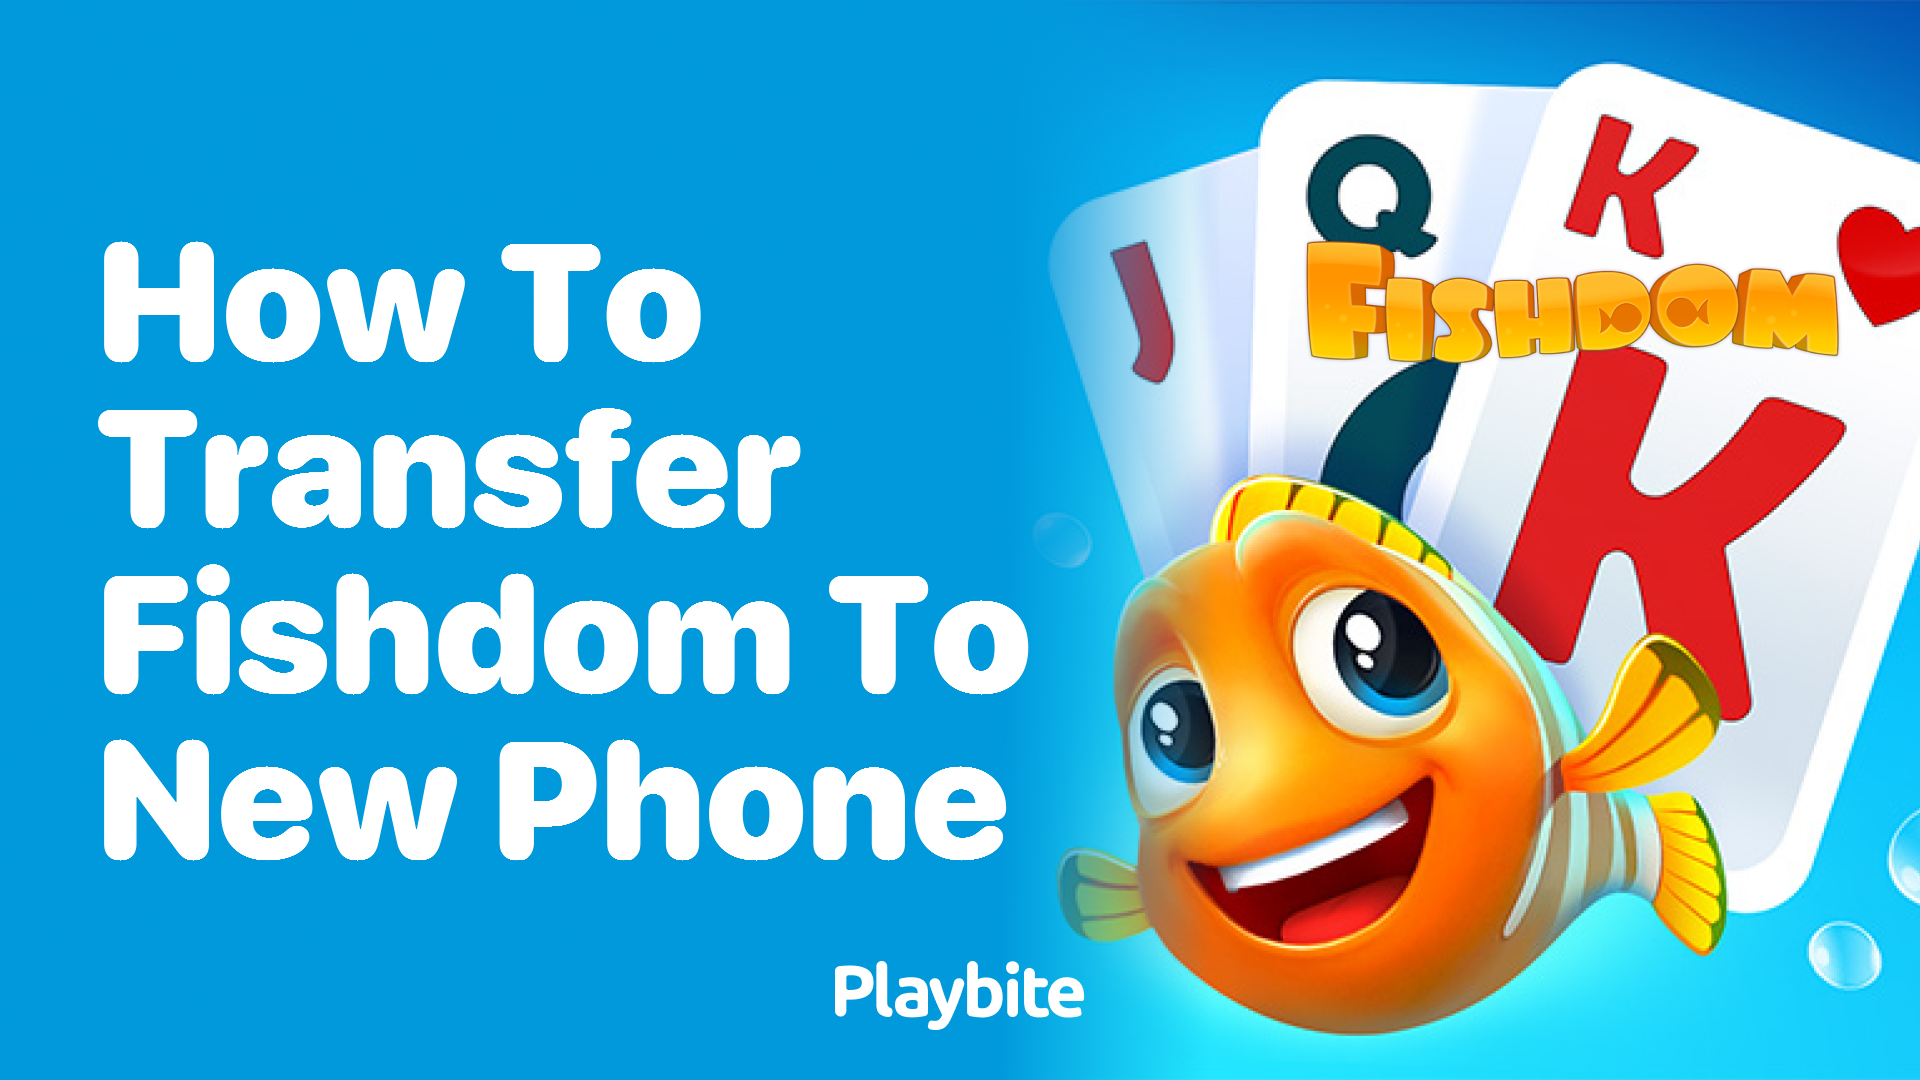 How to Transfer Fishdom to a New Phone